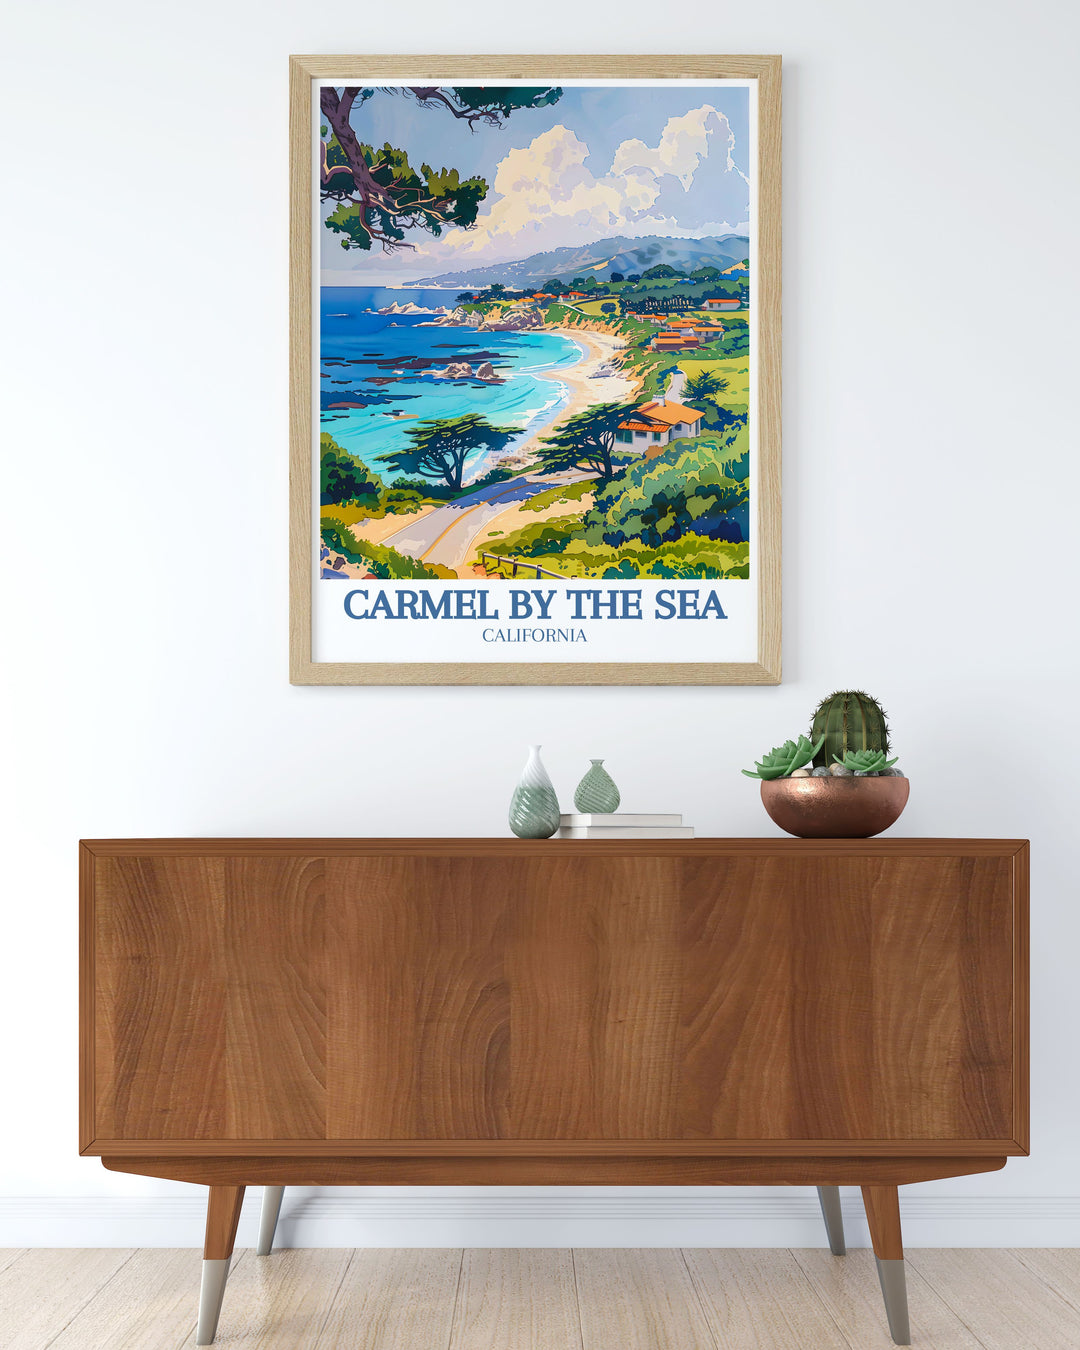 This travel poster beautifully depicts the charm of Carmel by the Sea, with its unique architecture and lush gardens, making it an ideal piece for art lovers and collectors. Bring the storybook charm of Carmel into your home with this stunning print.